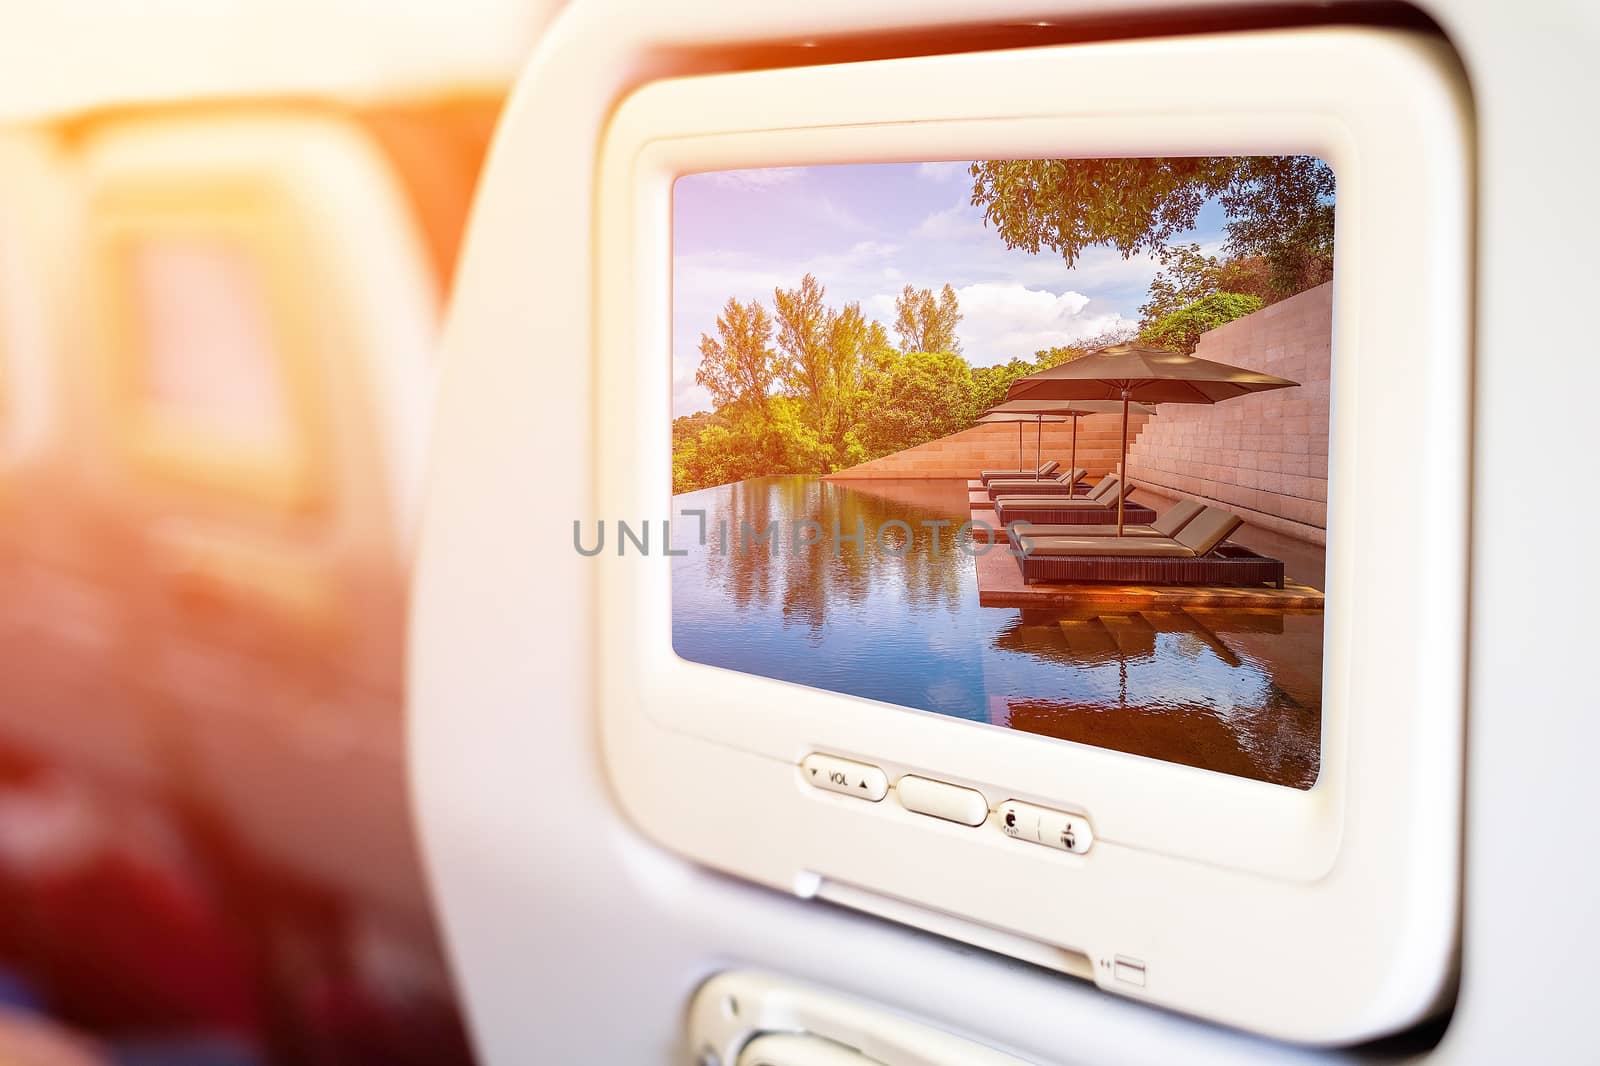 Aircraft monitor in passenger seat on beach pool background by Surasak